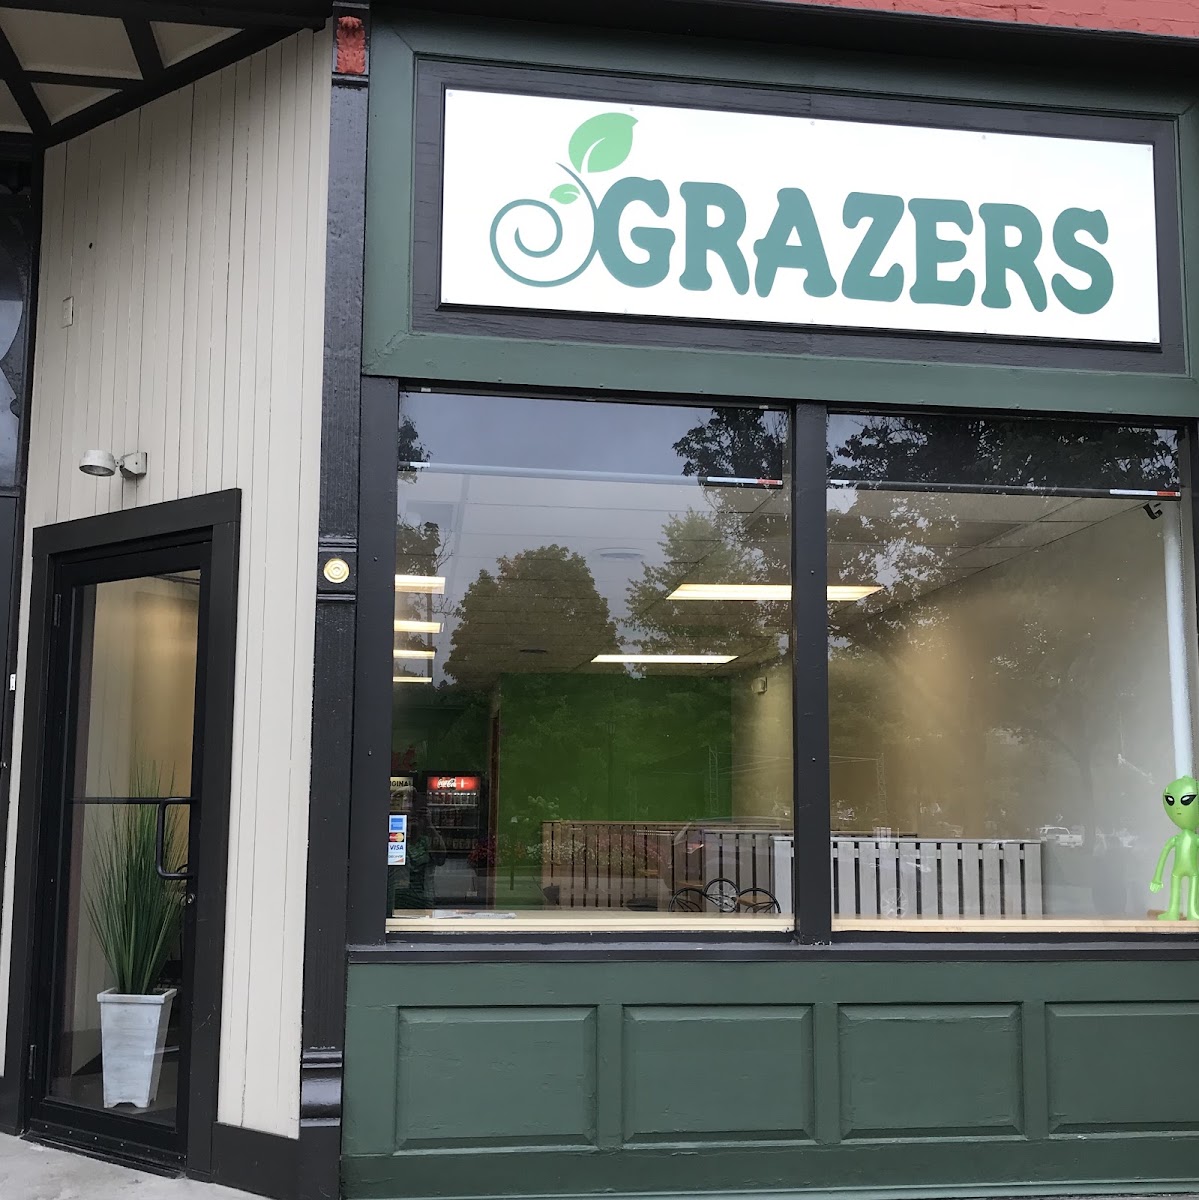 GRAZERS newest location at 123 N Water St. in Kent, Ohio. Easy to find. Free parking right behind the building!